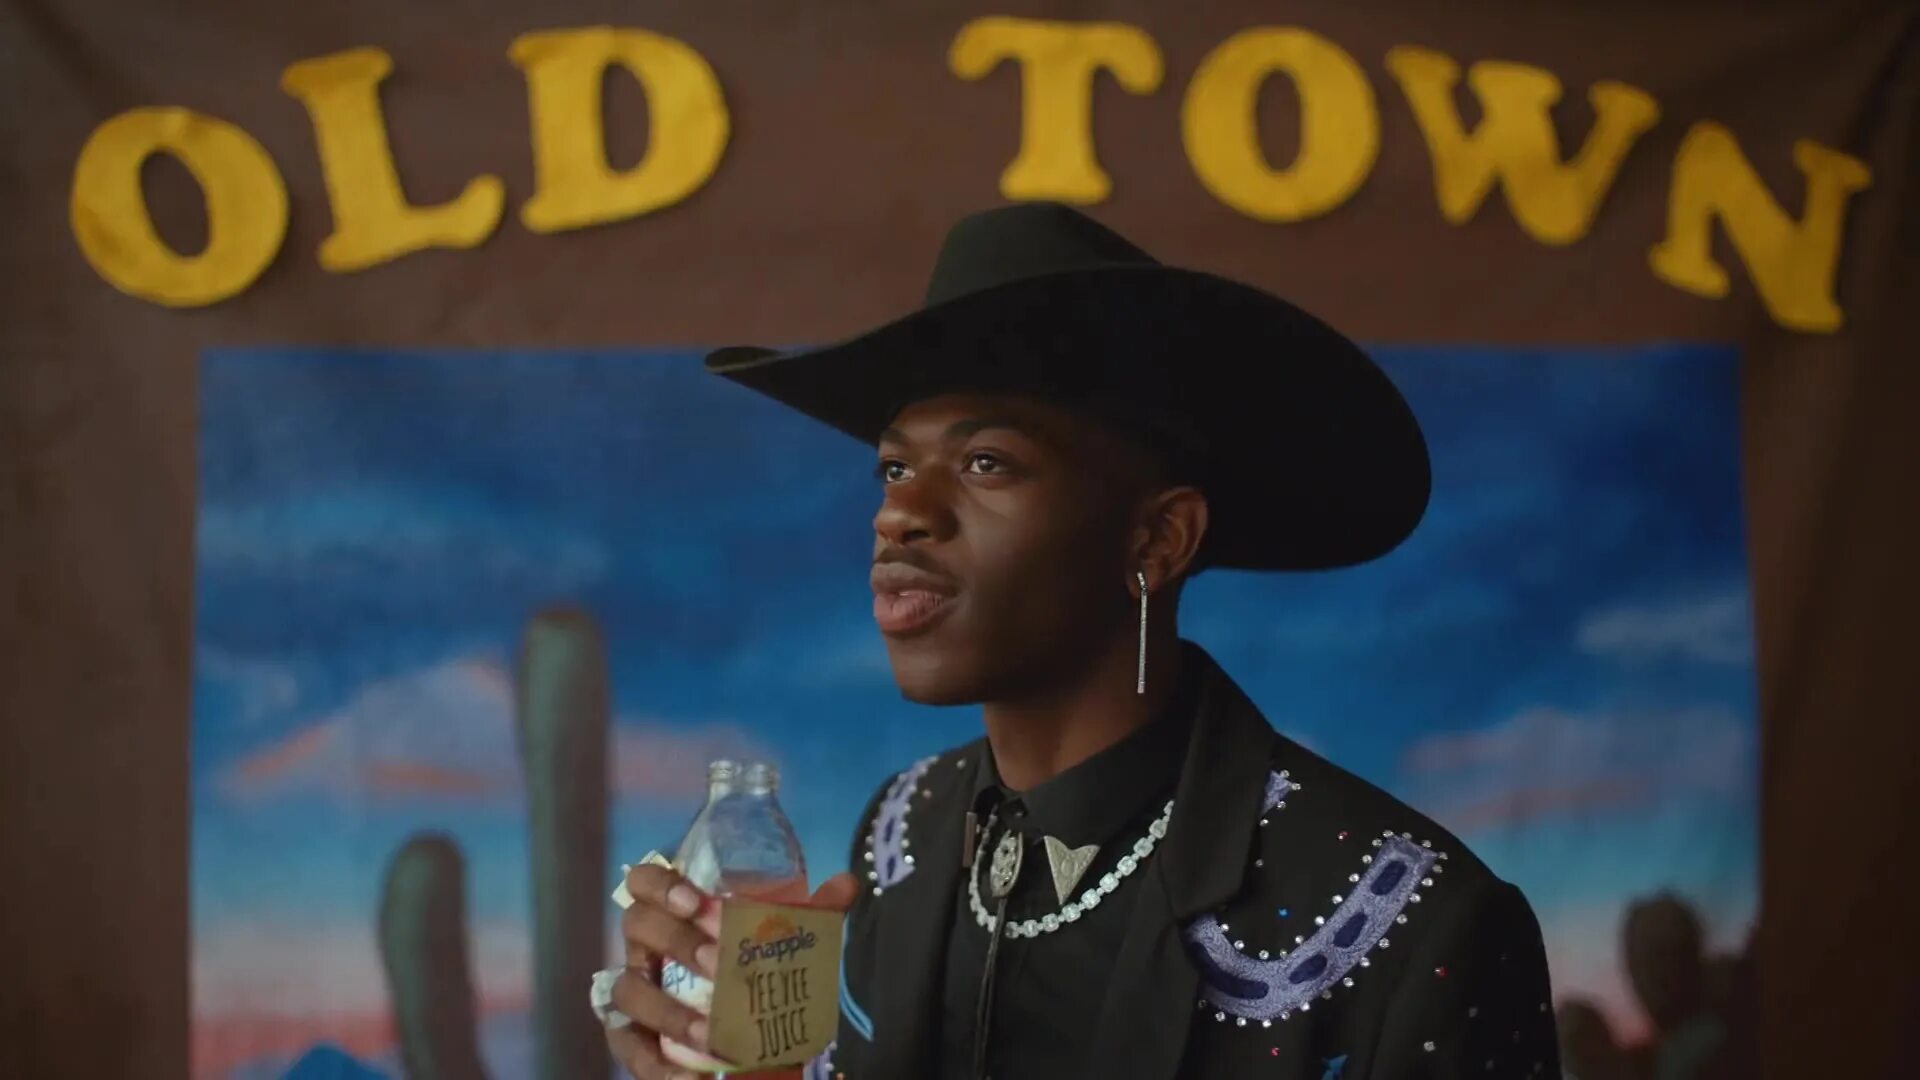 Old town road horses. Lil nas x old Town Road. Lil nas x’s old Town Road. Лил нас Олд Таун роад.